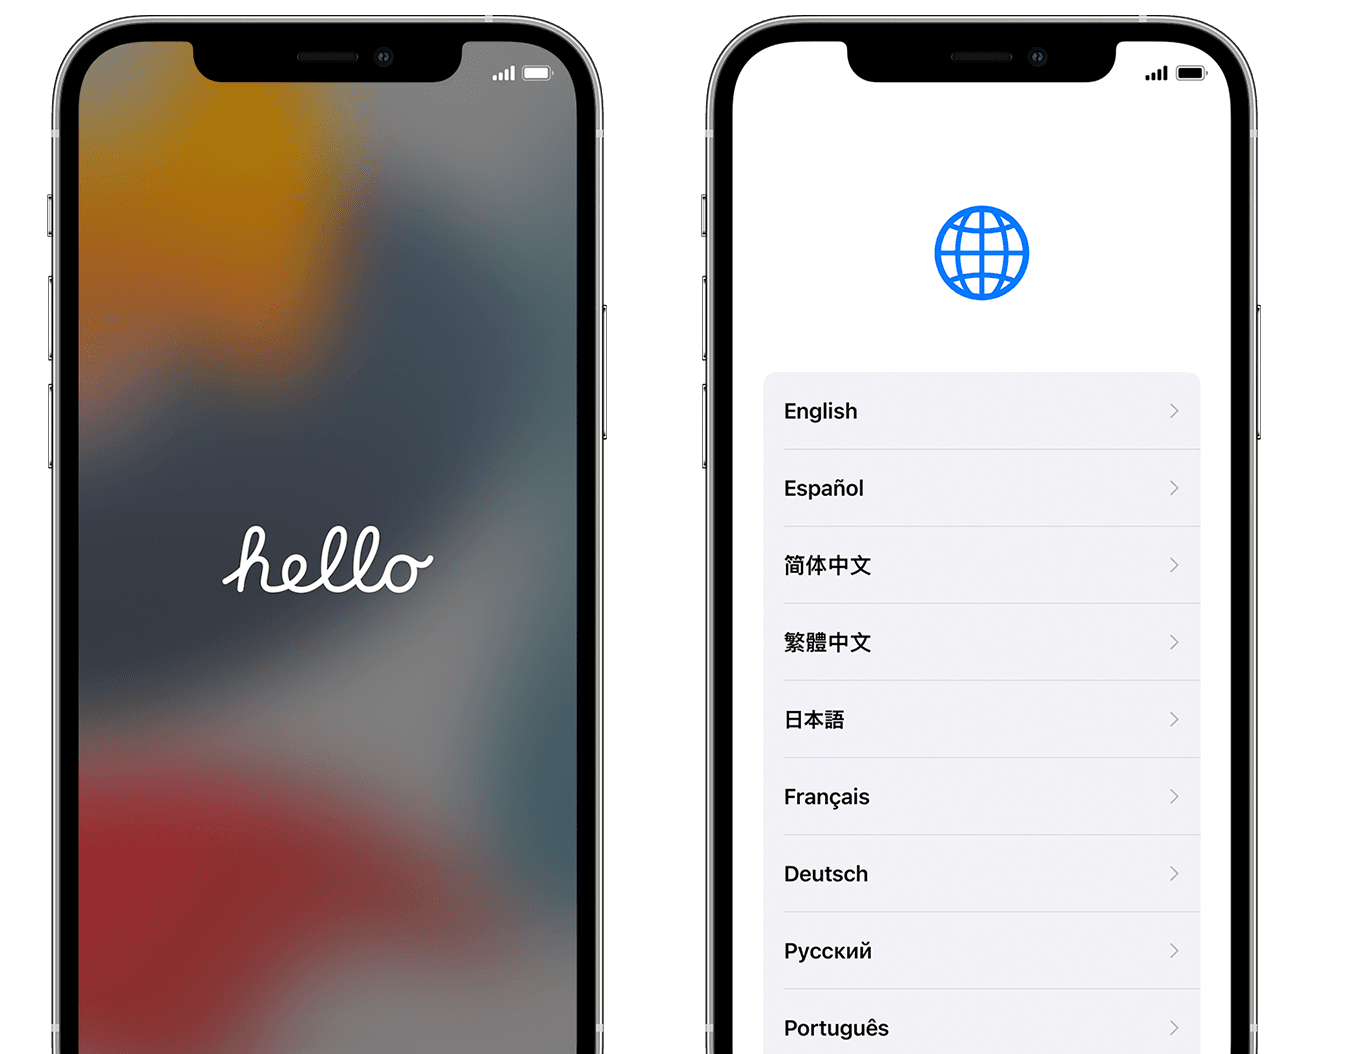 Hello screen with option to select your language